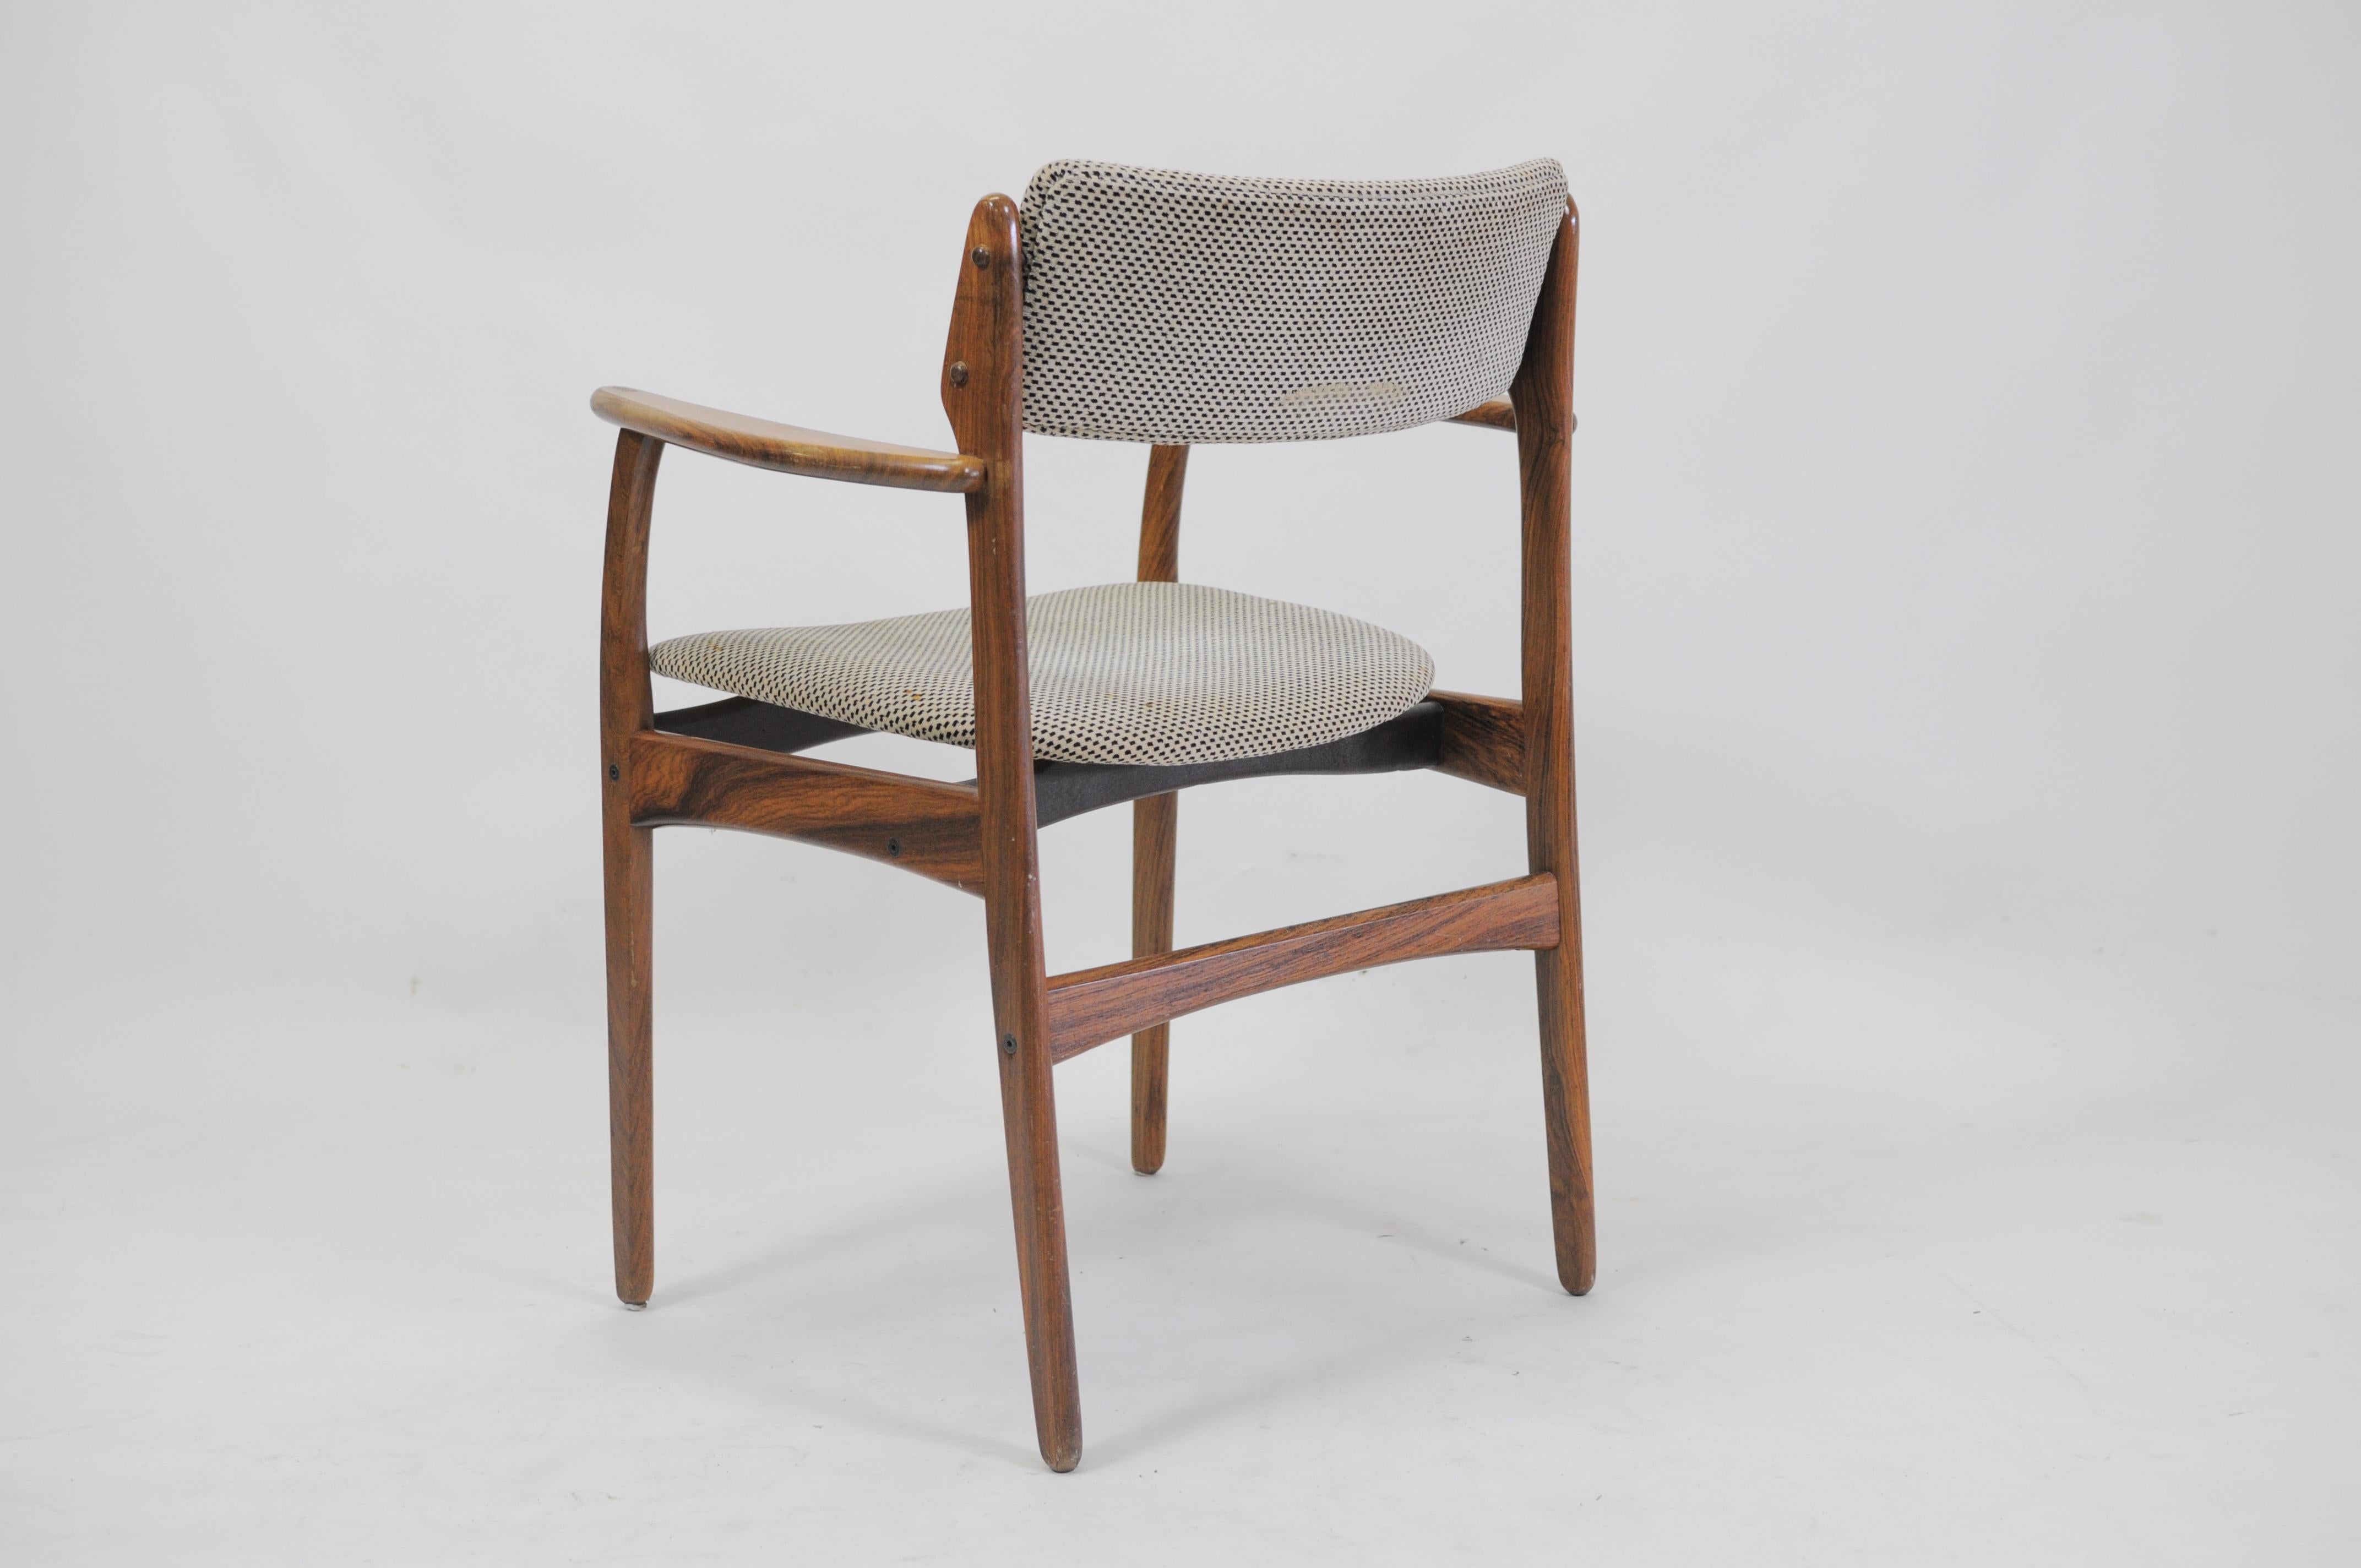 Rare set of four exclusive rosewood armchairs from the 1960s attributed to Erik Buch.

The chairs feature Erik Buchs well designed model 50 armchair with its elegant floating seat added elegant details as curved armrests and an almost floating